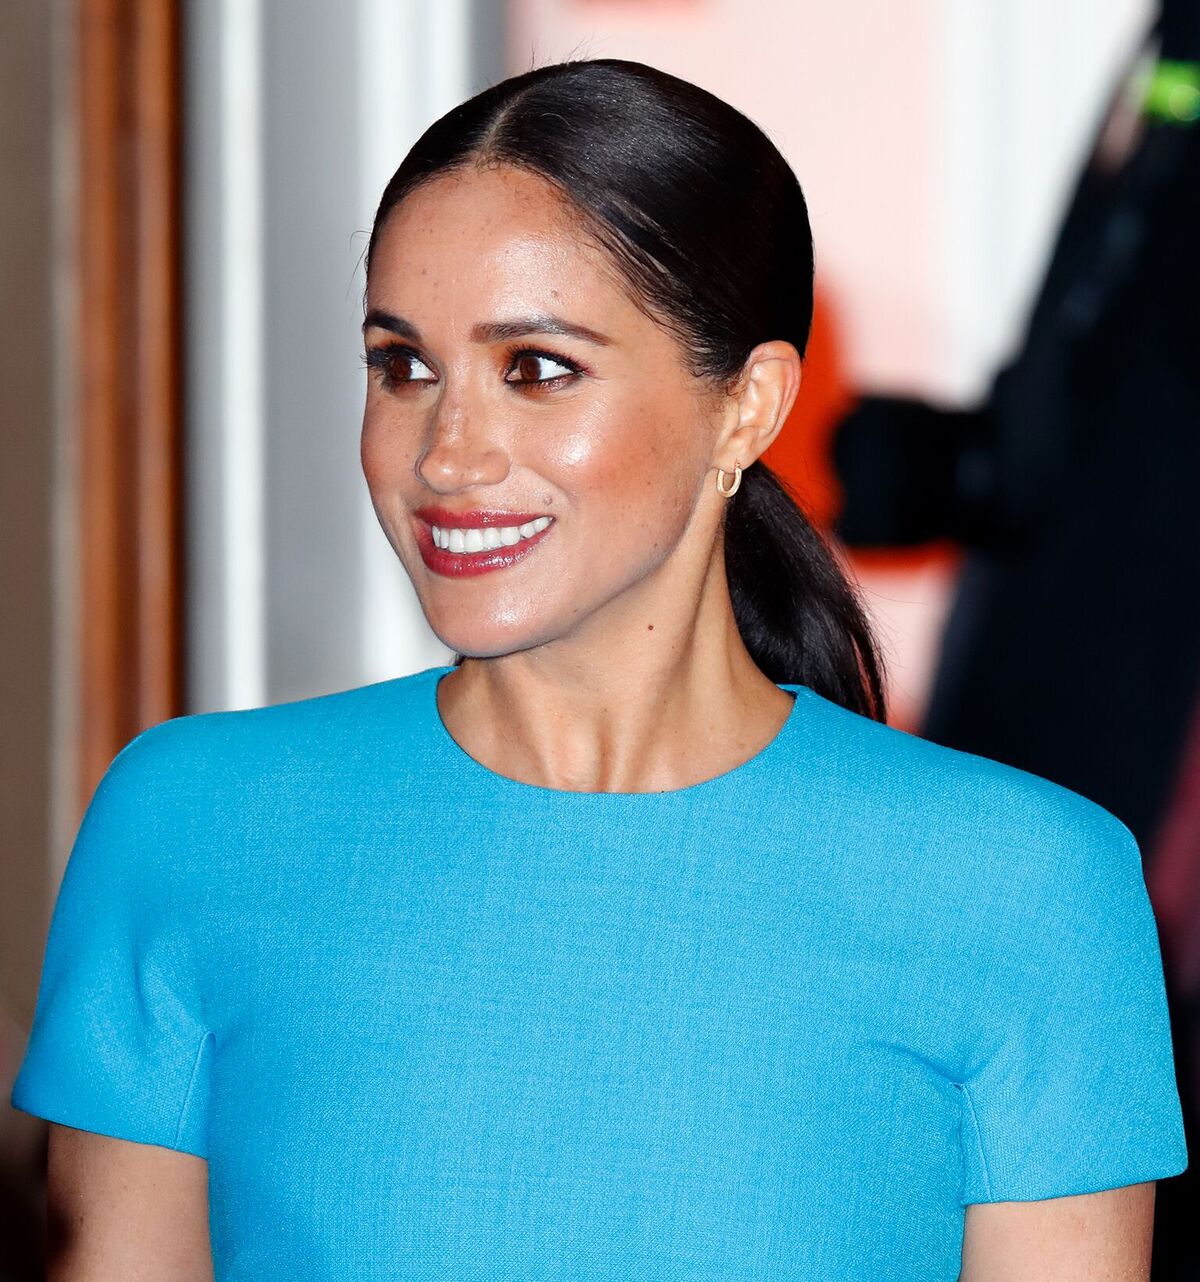 Duchess Meghan at The Endeavour Fund Awards on March 5, 2020, in London, England | Photo: Max Mumby/Indigo/Getty Images